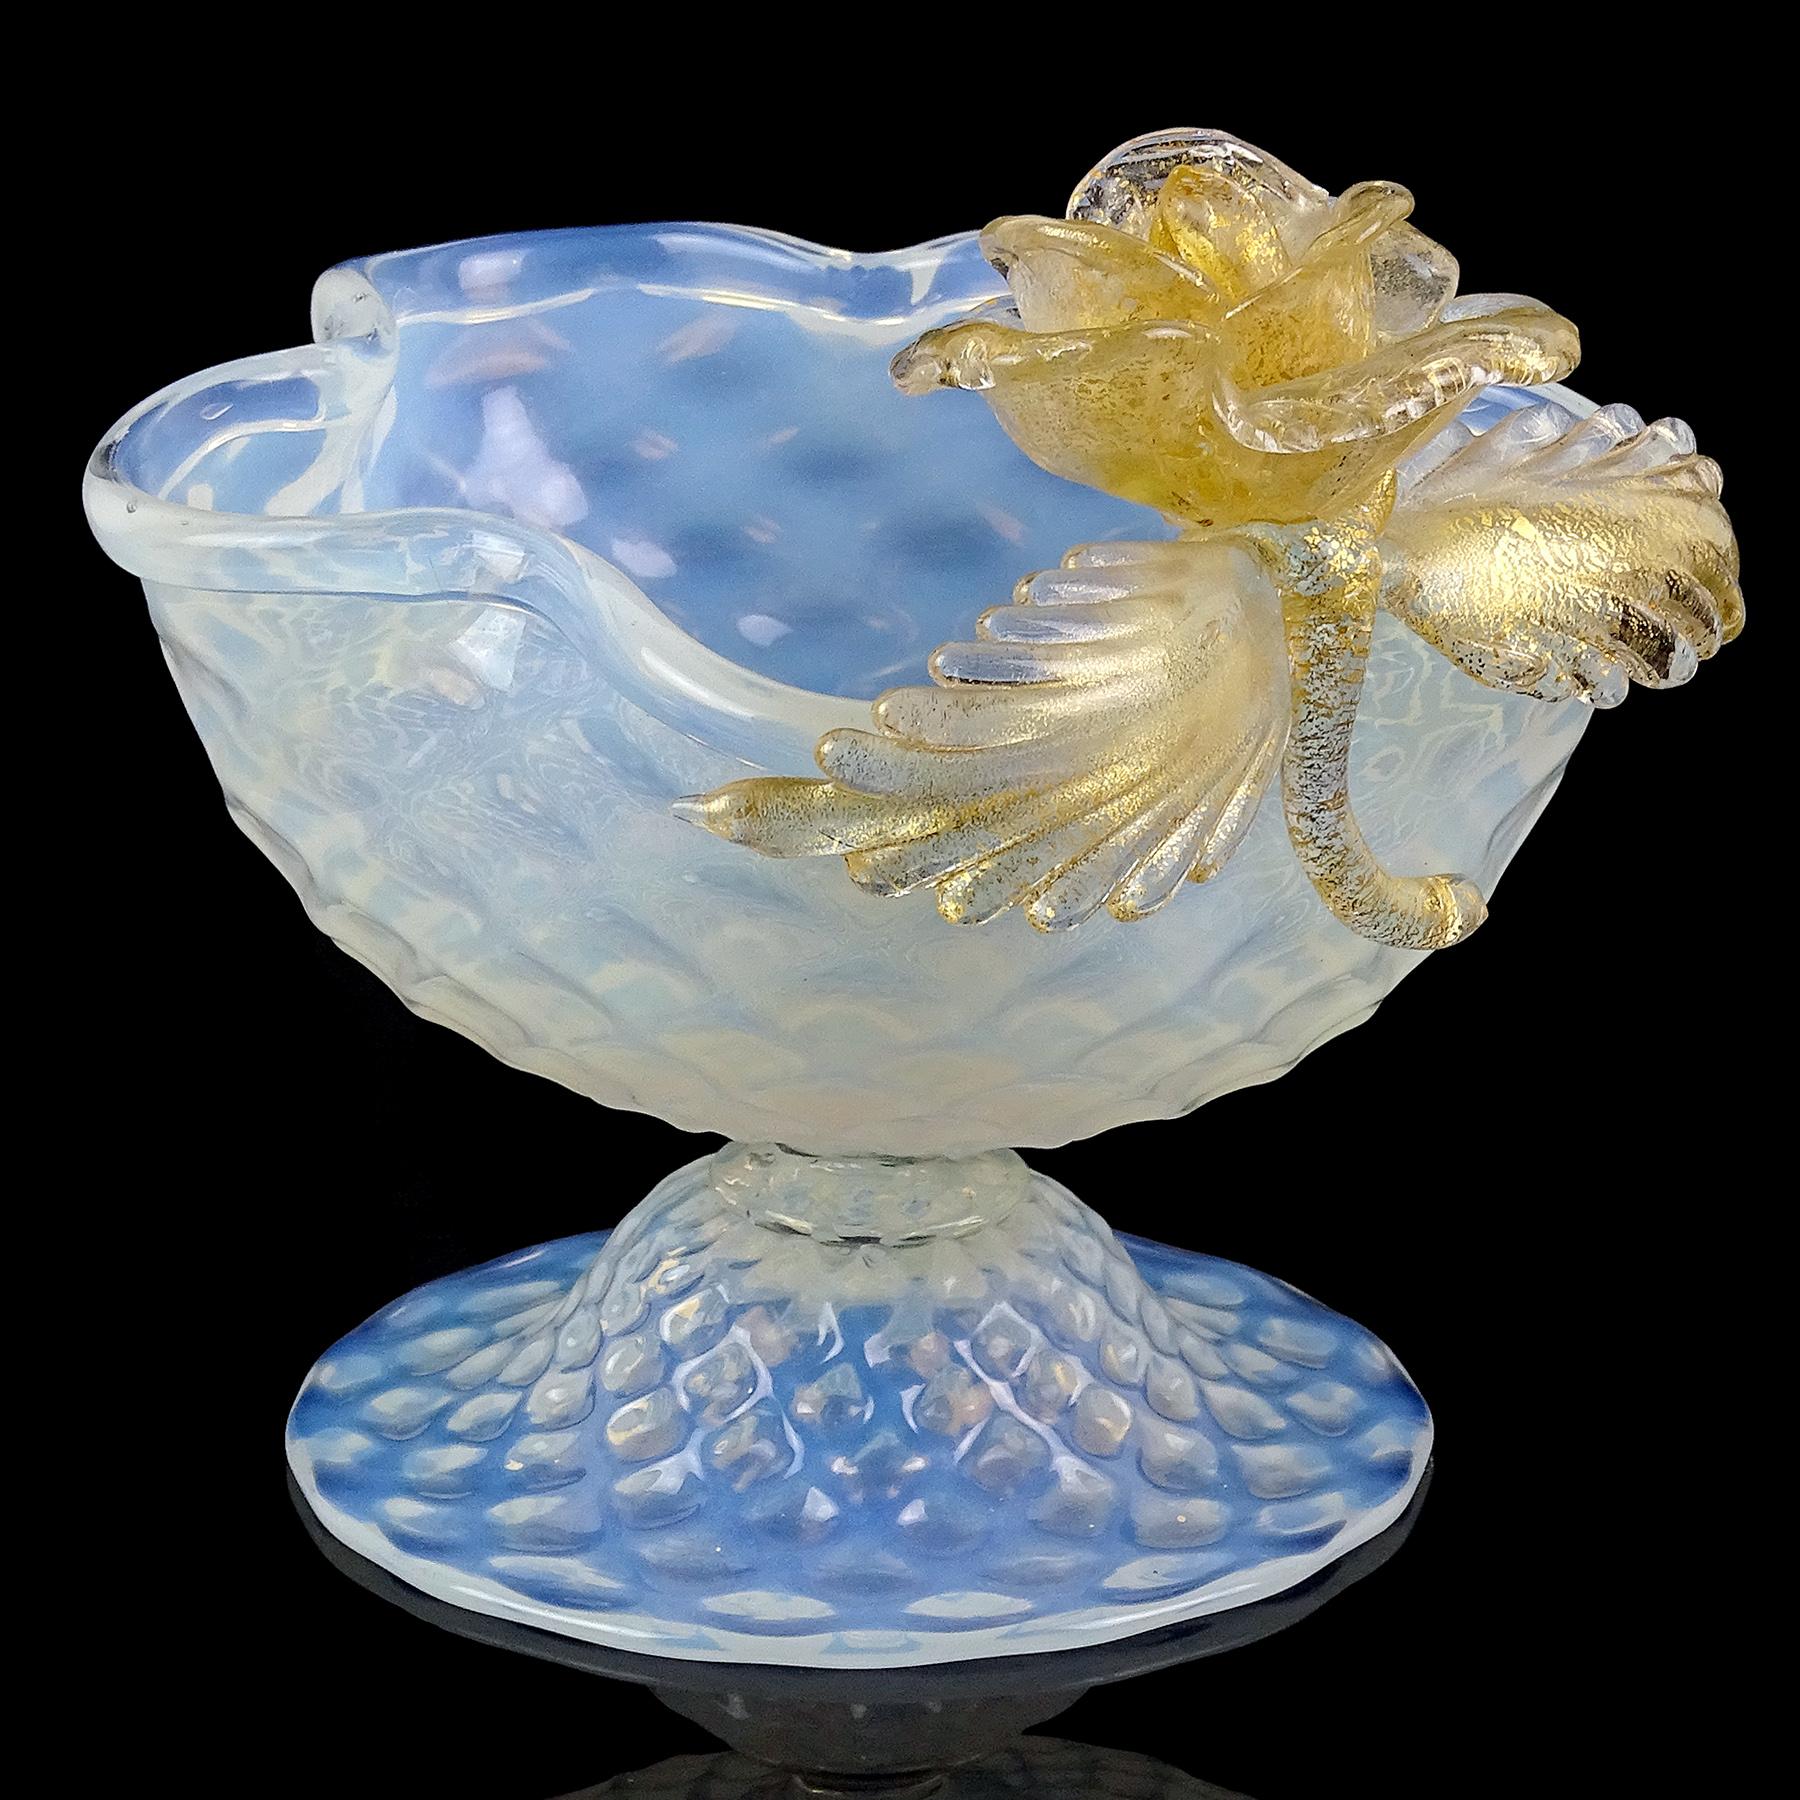 Beautiful antique Murano hand blown opalescent with gold flecks flower and leafs Italian art glass quilted footed bowl. The bowl itself has a flower shape, with pinched sides along the rim, and diamond quilted pattern throughout. It has an applied